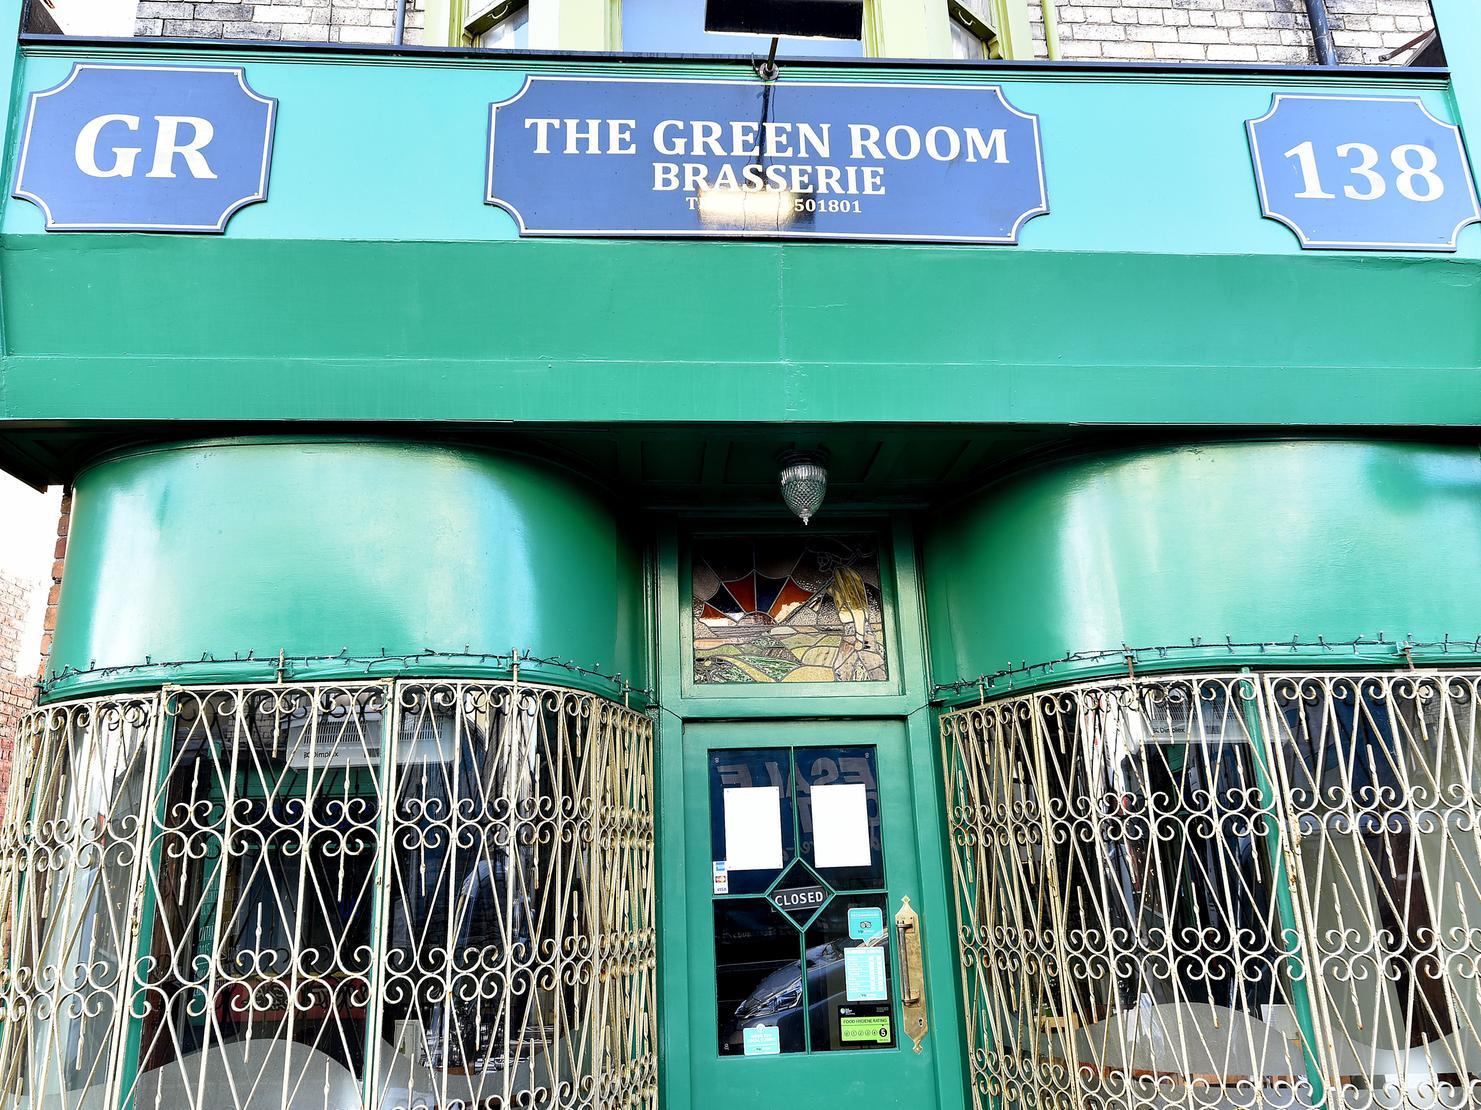 A reviewer said: A reviewer said: Another gorgeous meal at The Green Room, lovely atmosphere, small intimate dining, have visited before in a larger group and the food quality, presentation and service are all excellent.